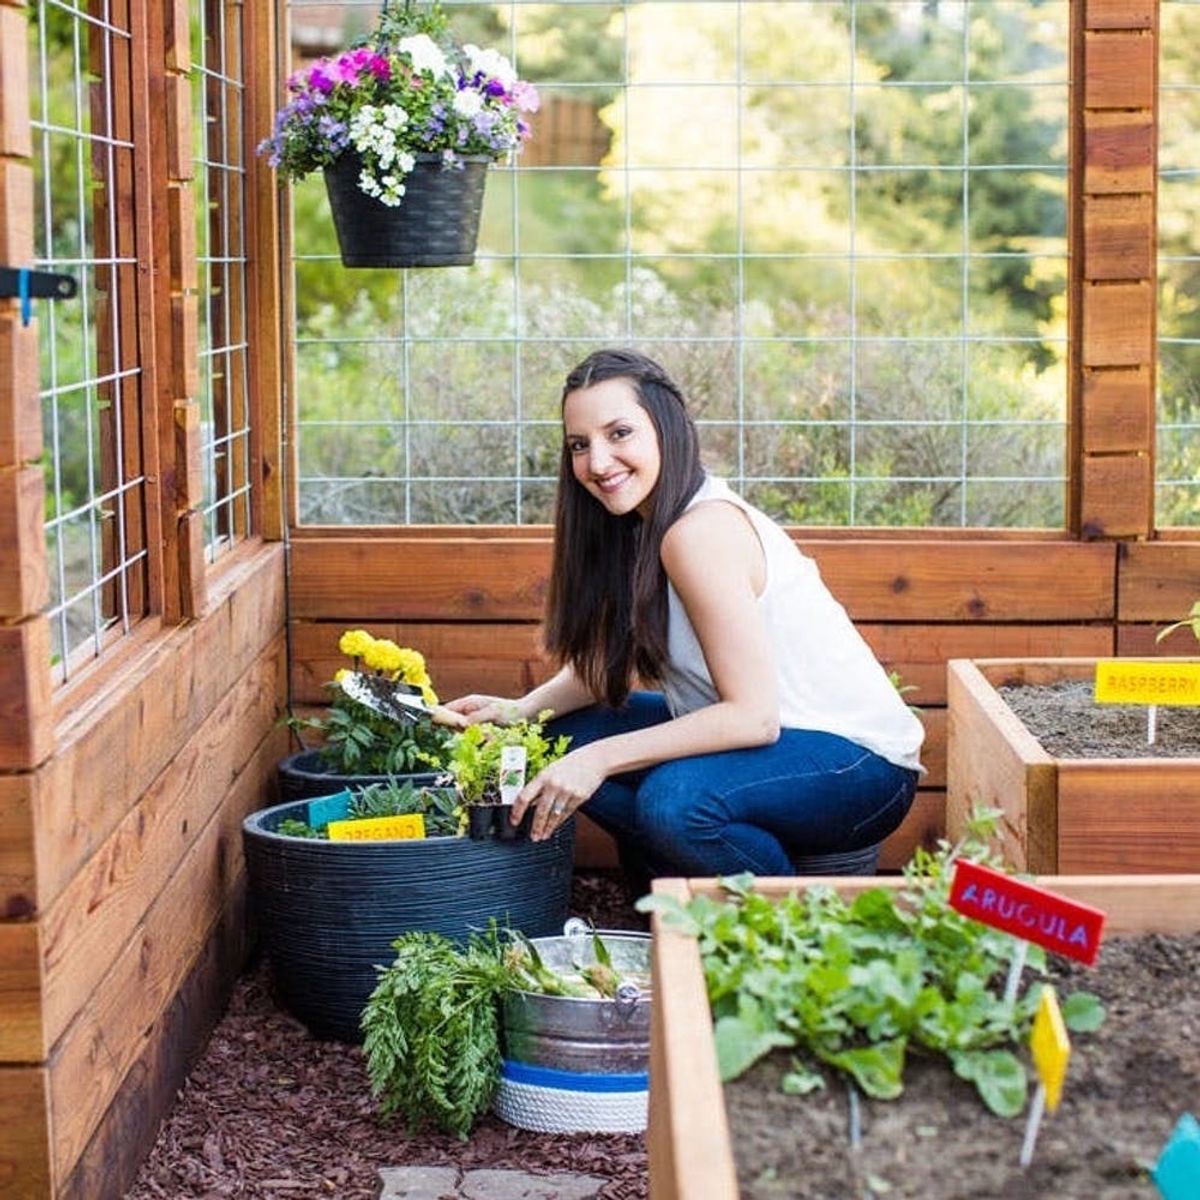 25 Raised Garden Beds That Will Inspire You to Actually Grow Veggies This Year